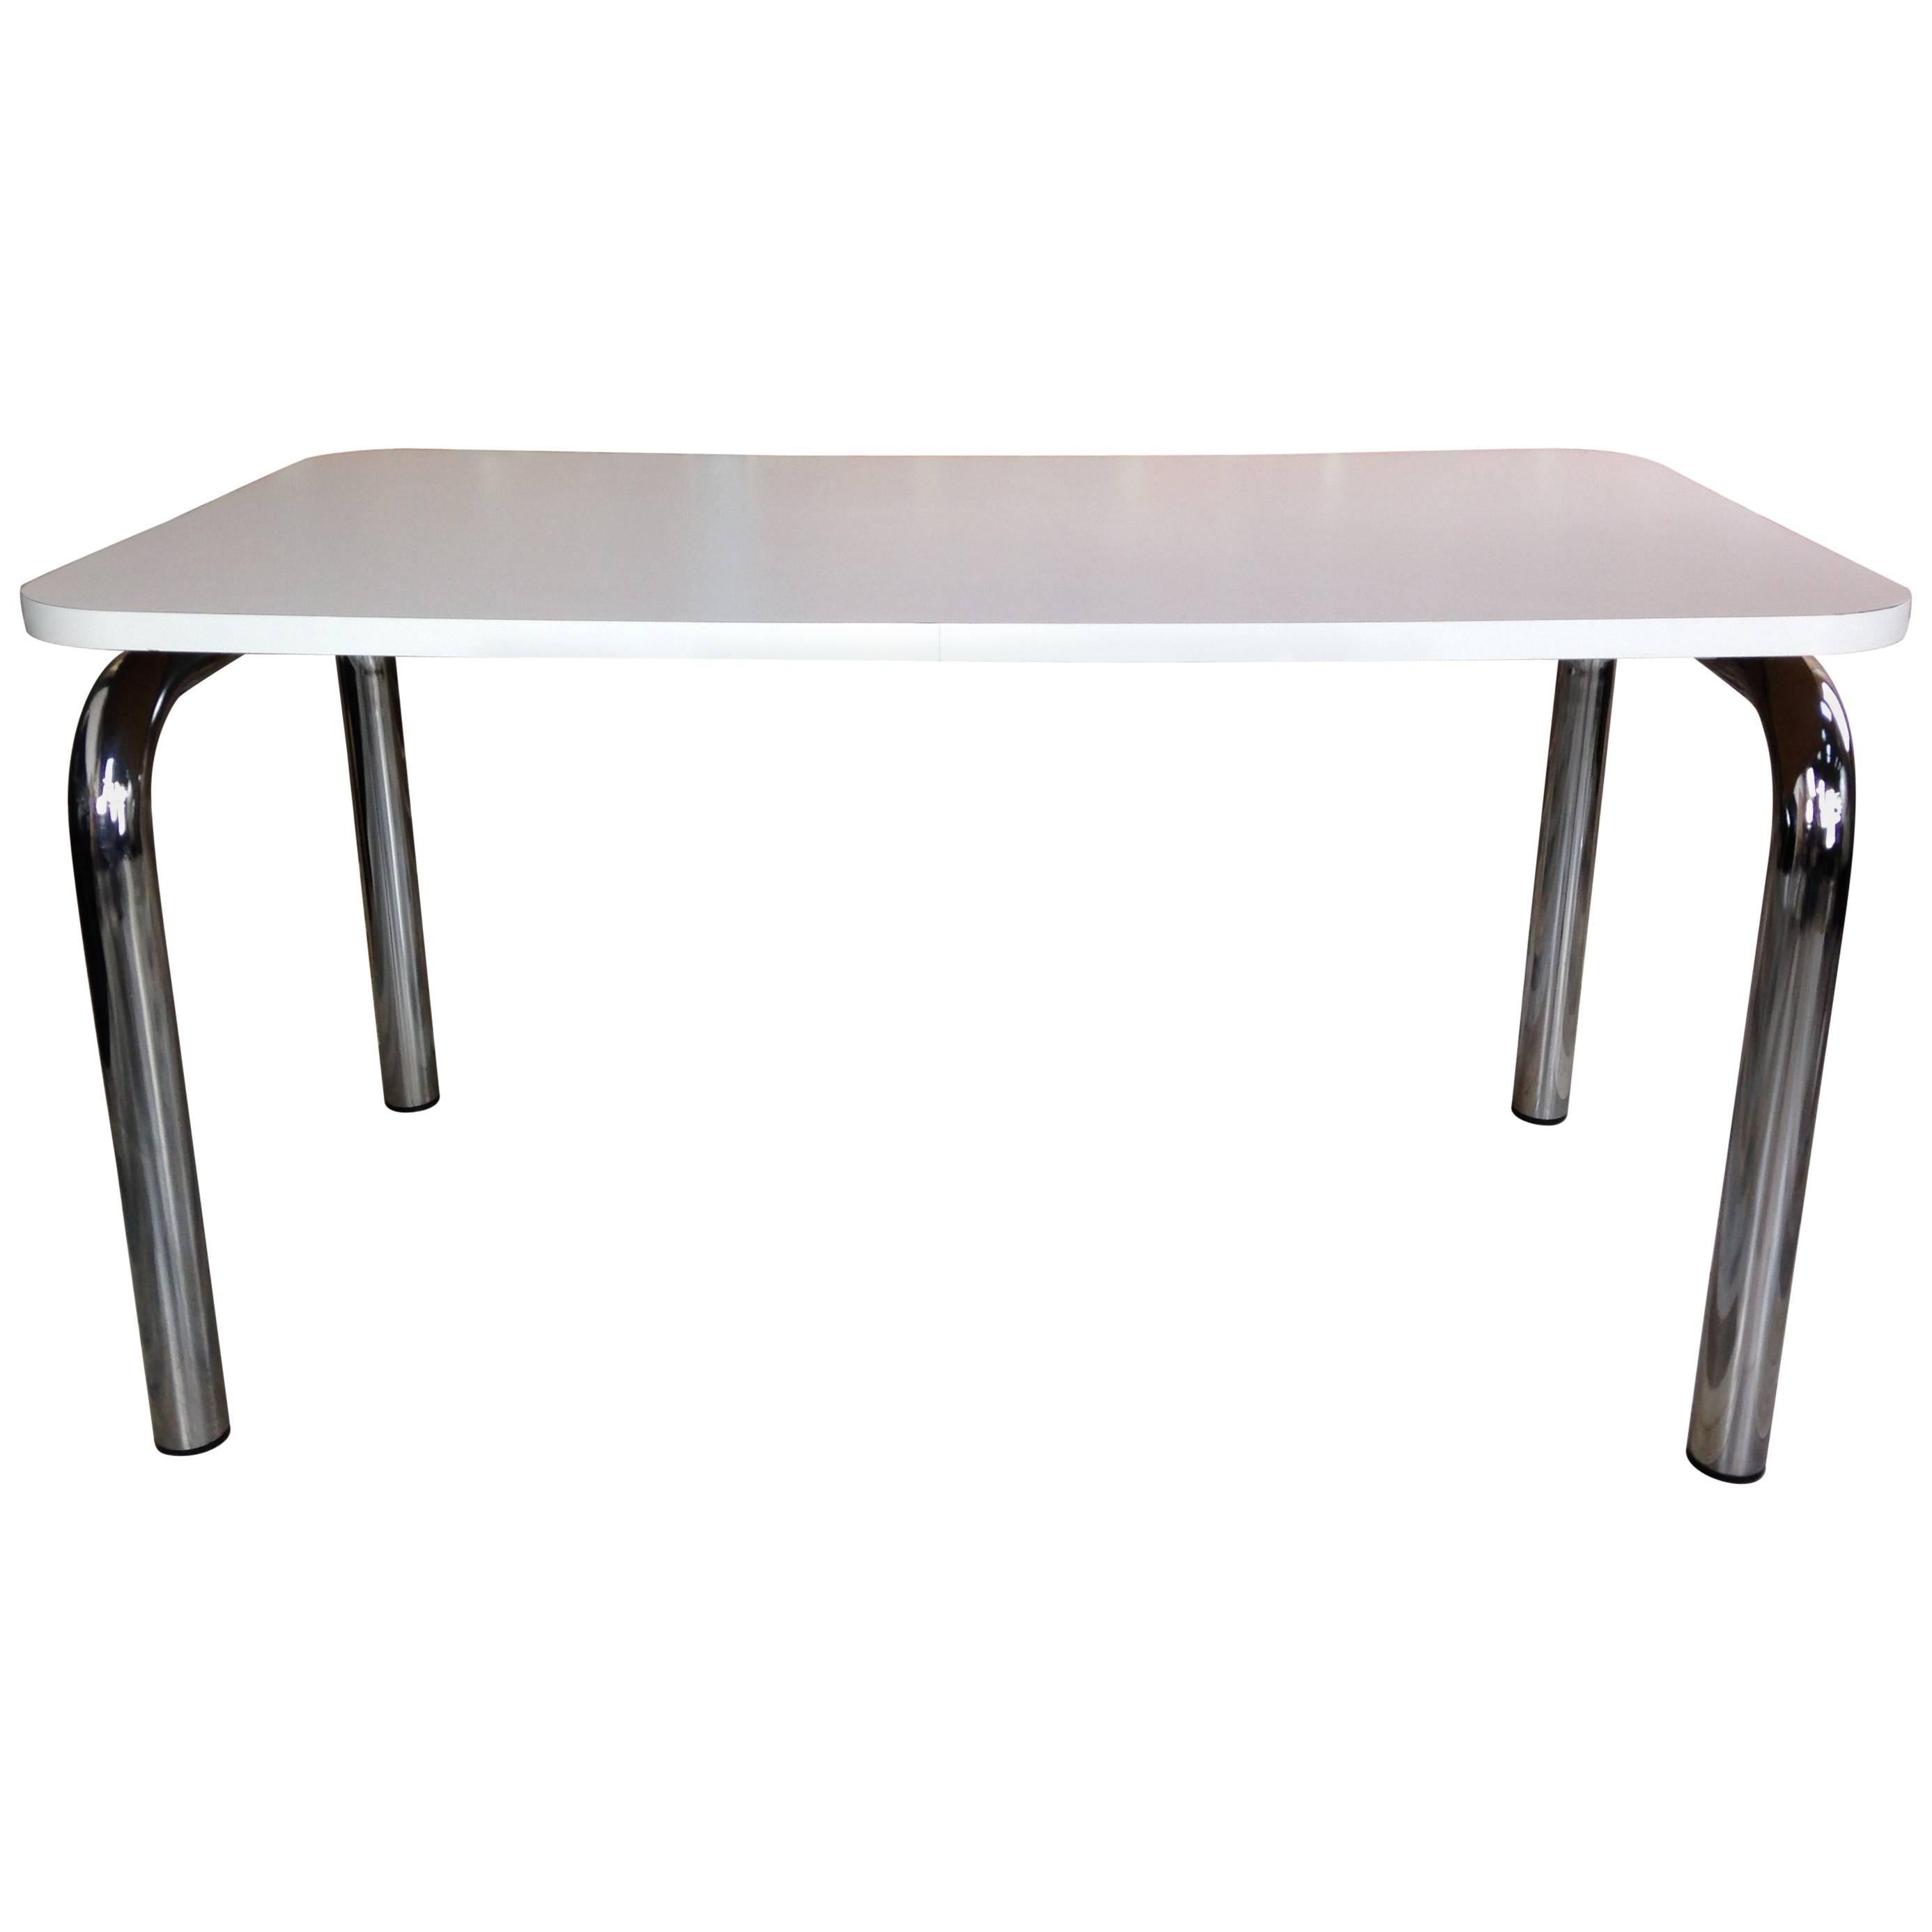 Dutch Design Of The 60's Chrome And Formica Dining Table